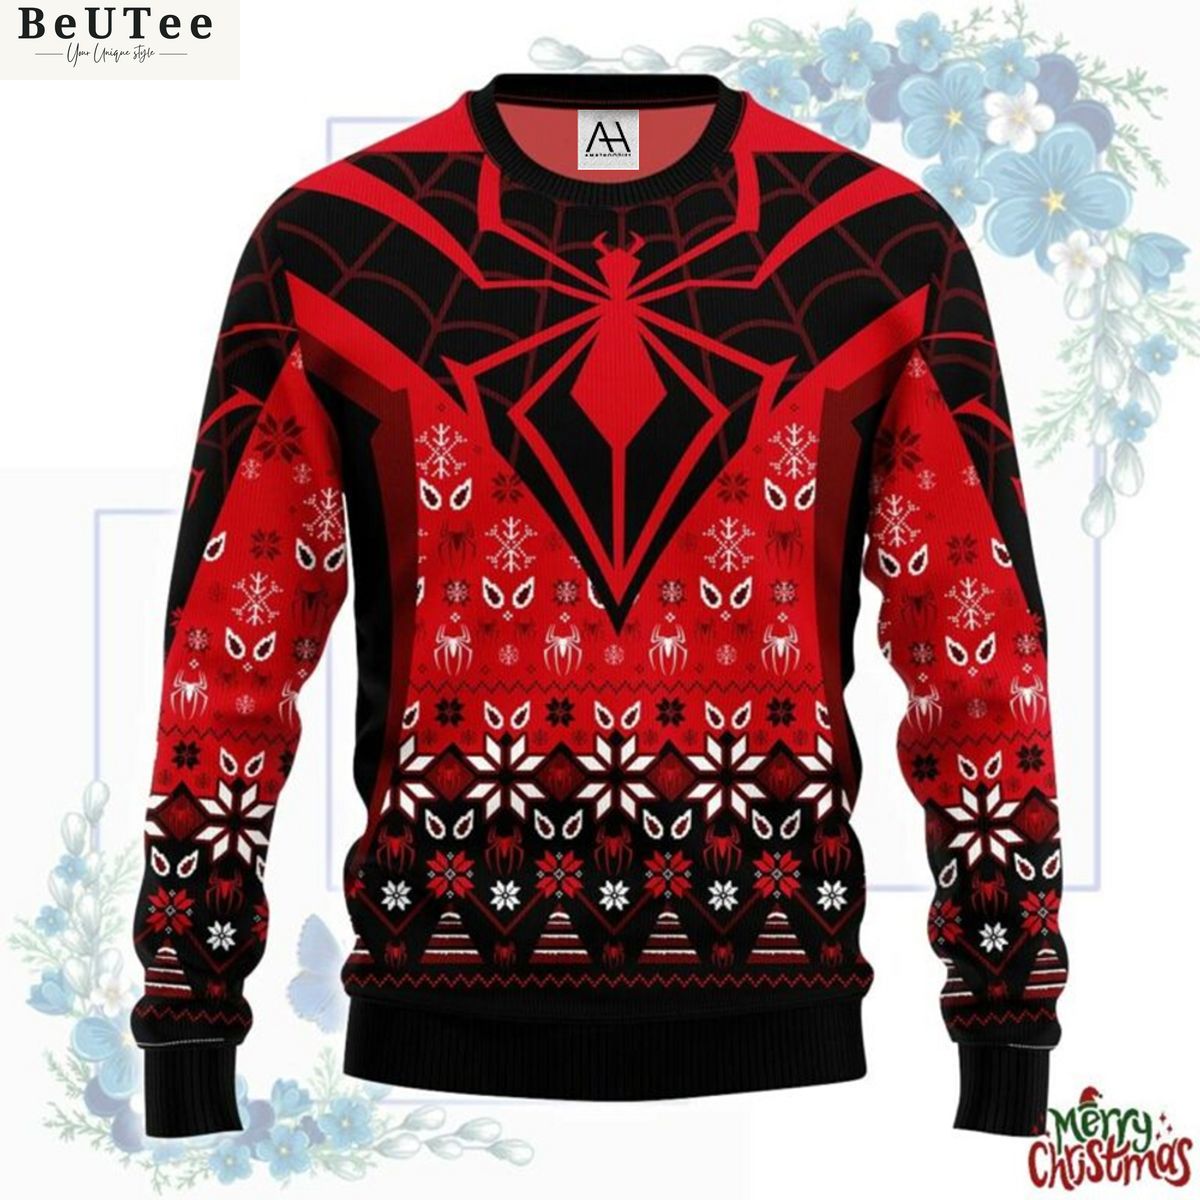 spider man miles morales ugly christmas sweater 1 YyH00.jpg